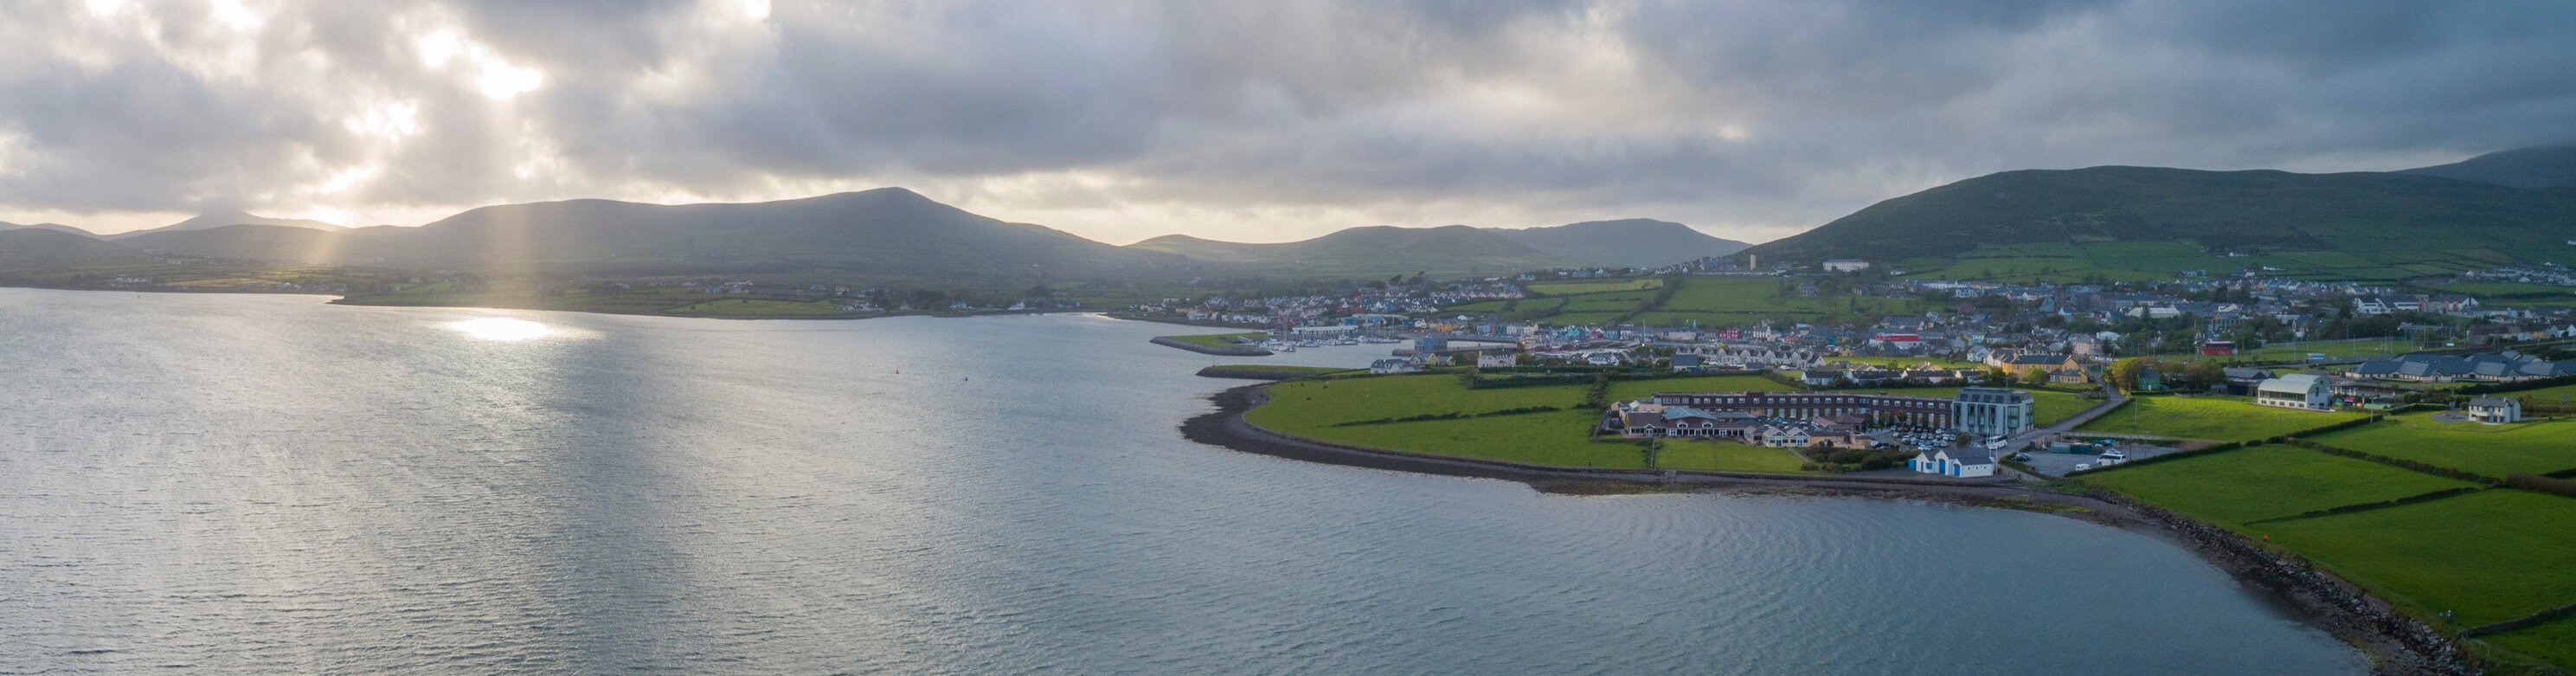 Scenic drone shot of Dingle Bay and Dingle Skellig Hotel in Ireland